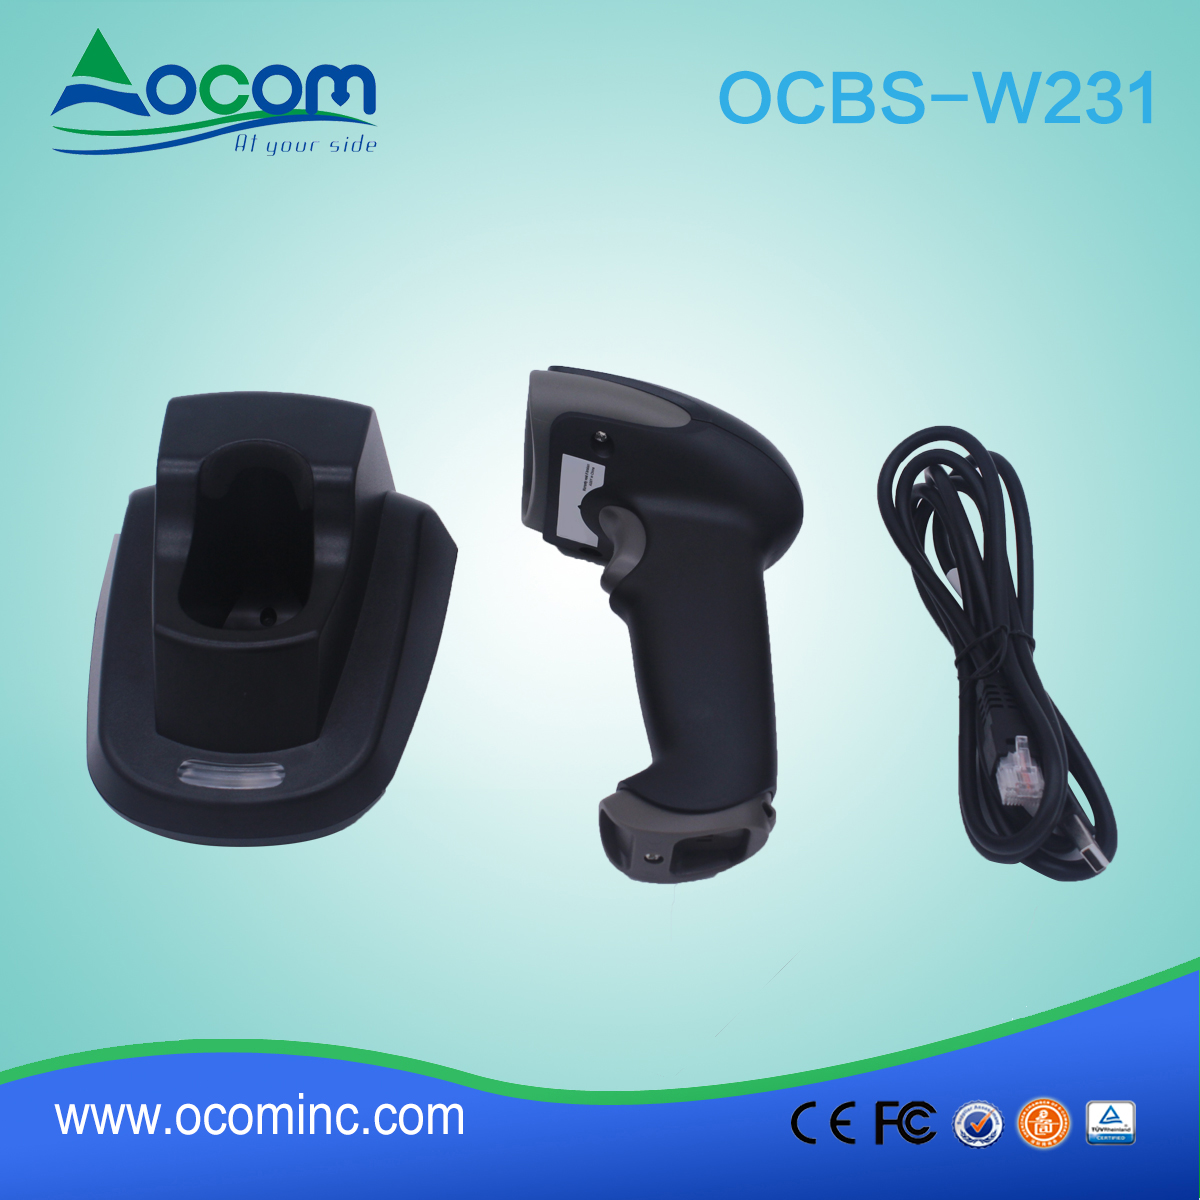 (OCBS-W231) Robusto 433MHz Barcode scanner 2D con culla